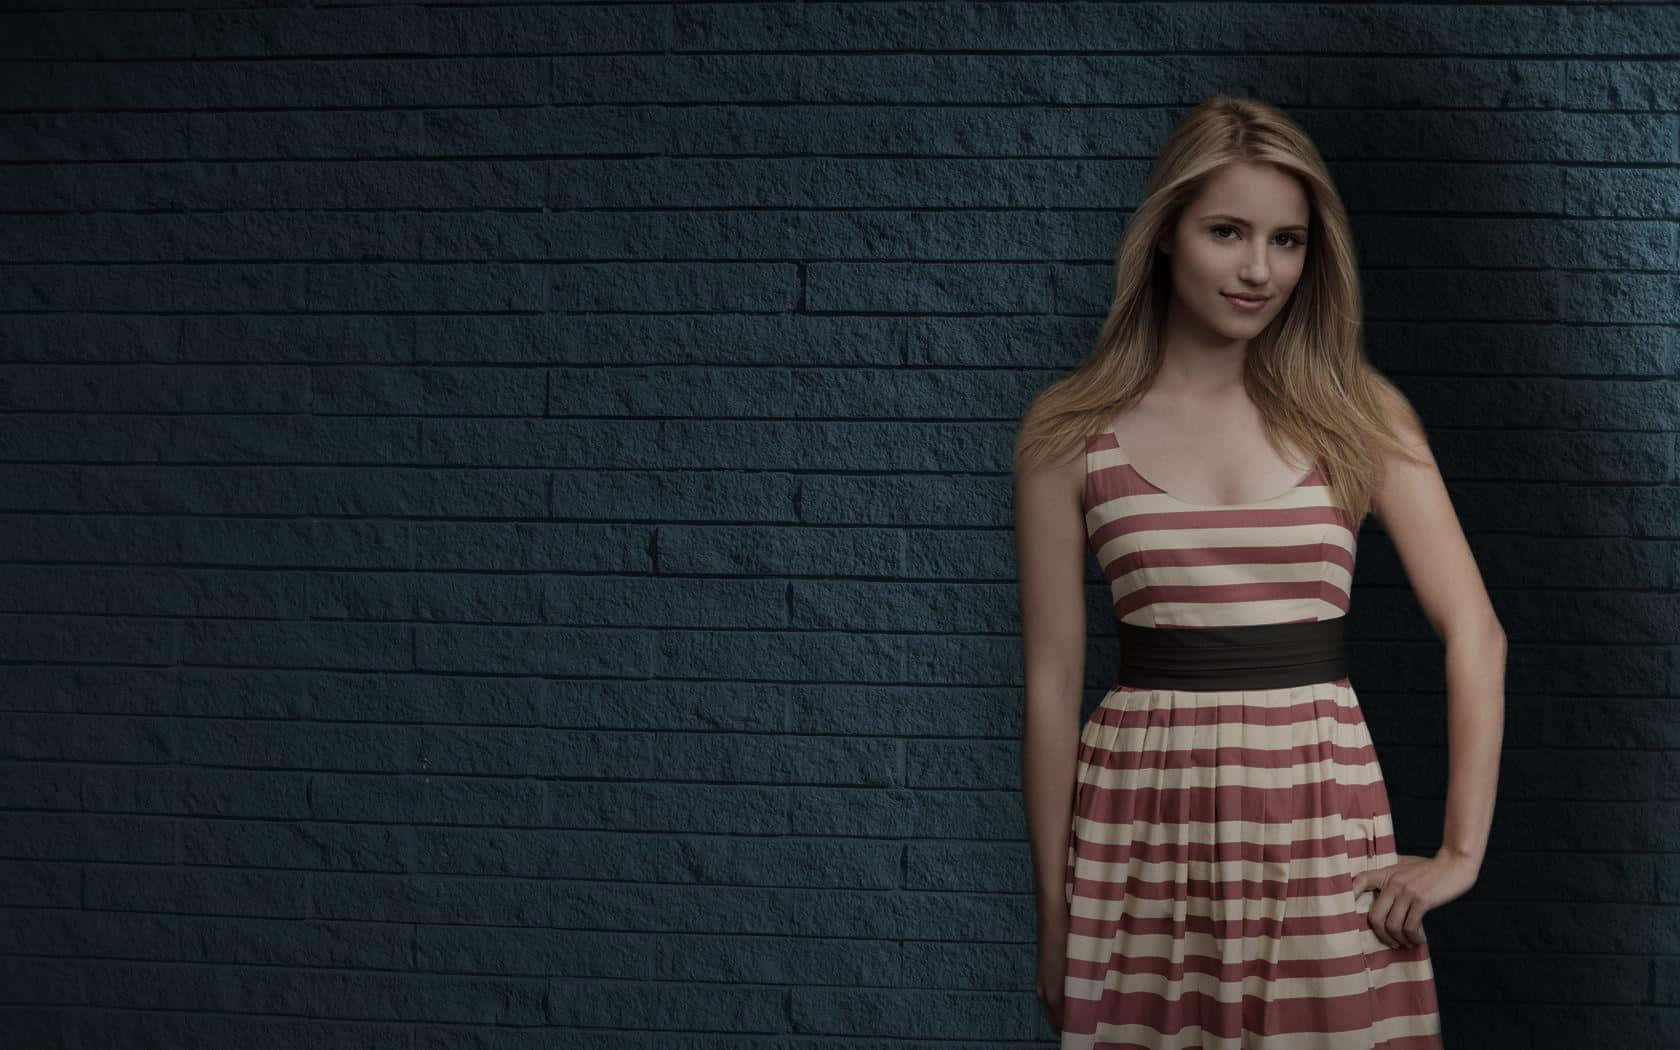 Dianna Agron posing in a stunning photoshoot Wallpaper